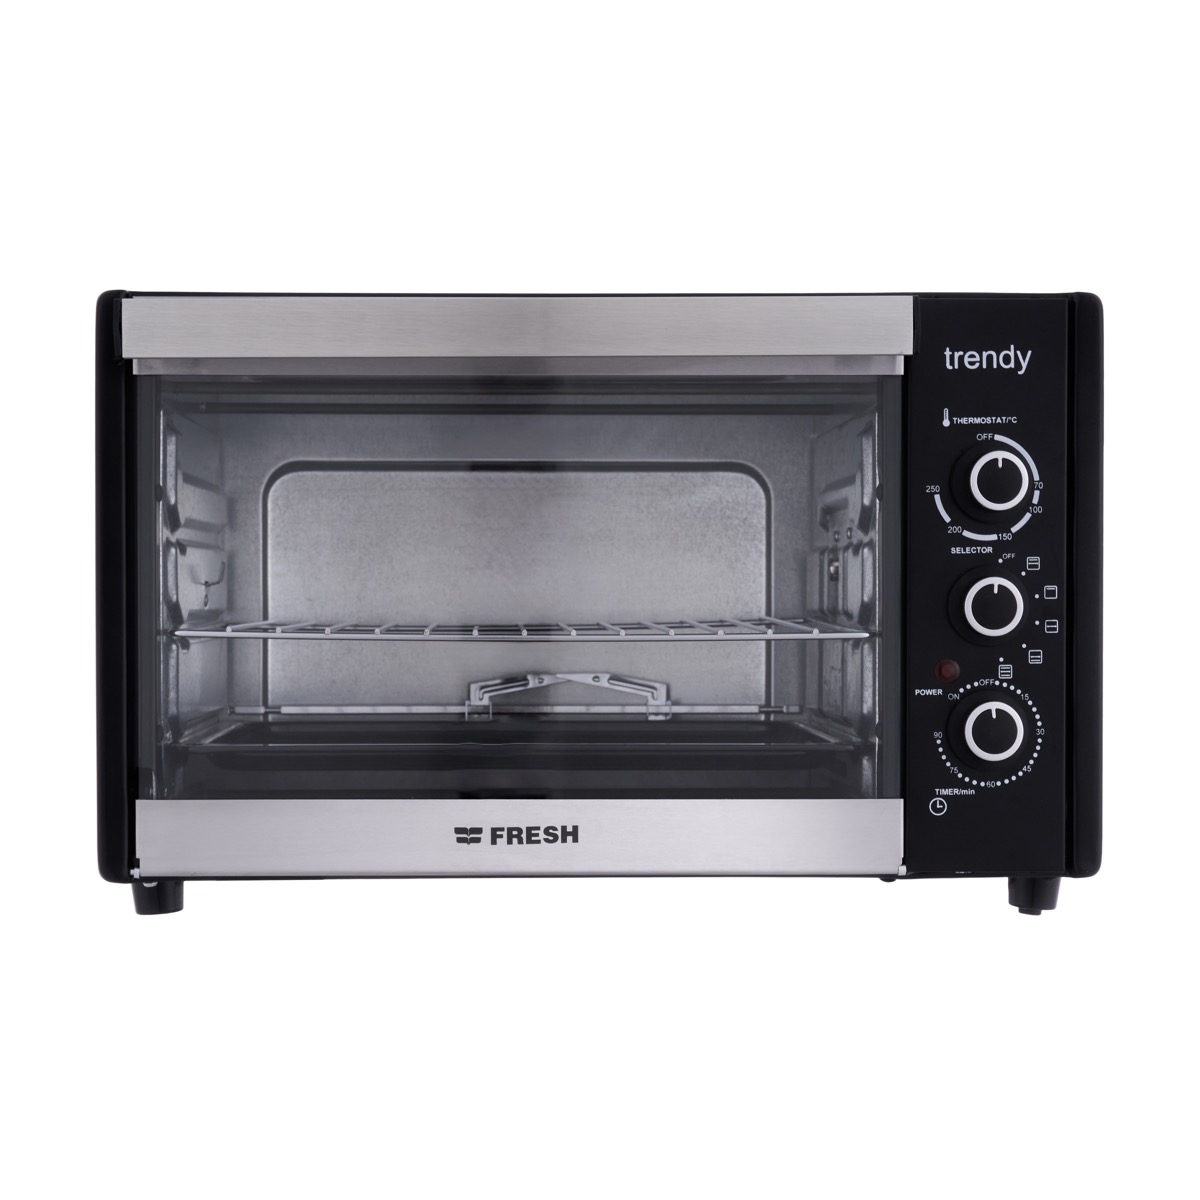 Fresh Electric Oven with Grill, 36 Liters, 1700 Watt, Black Silver - FR-36R